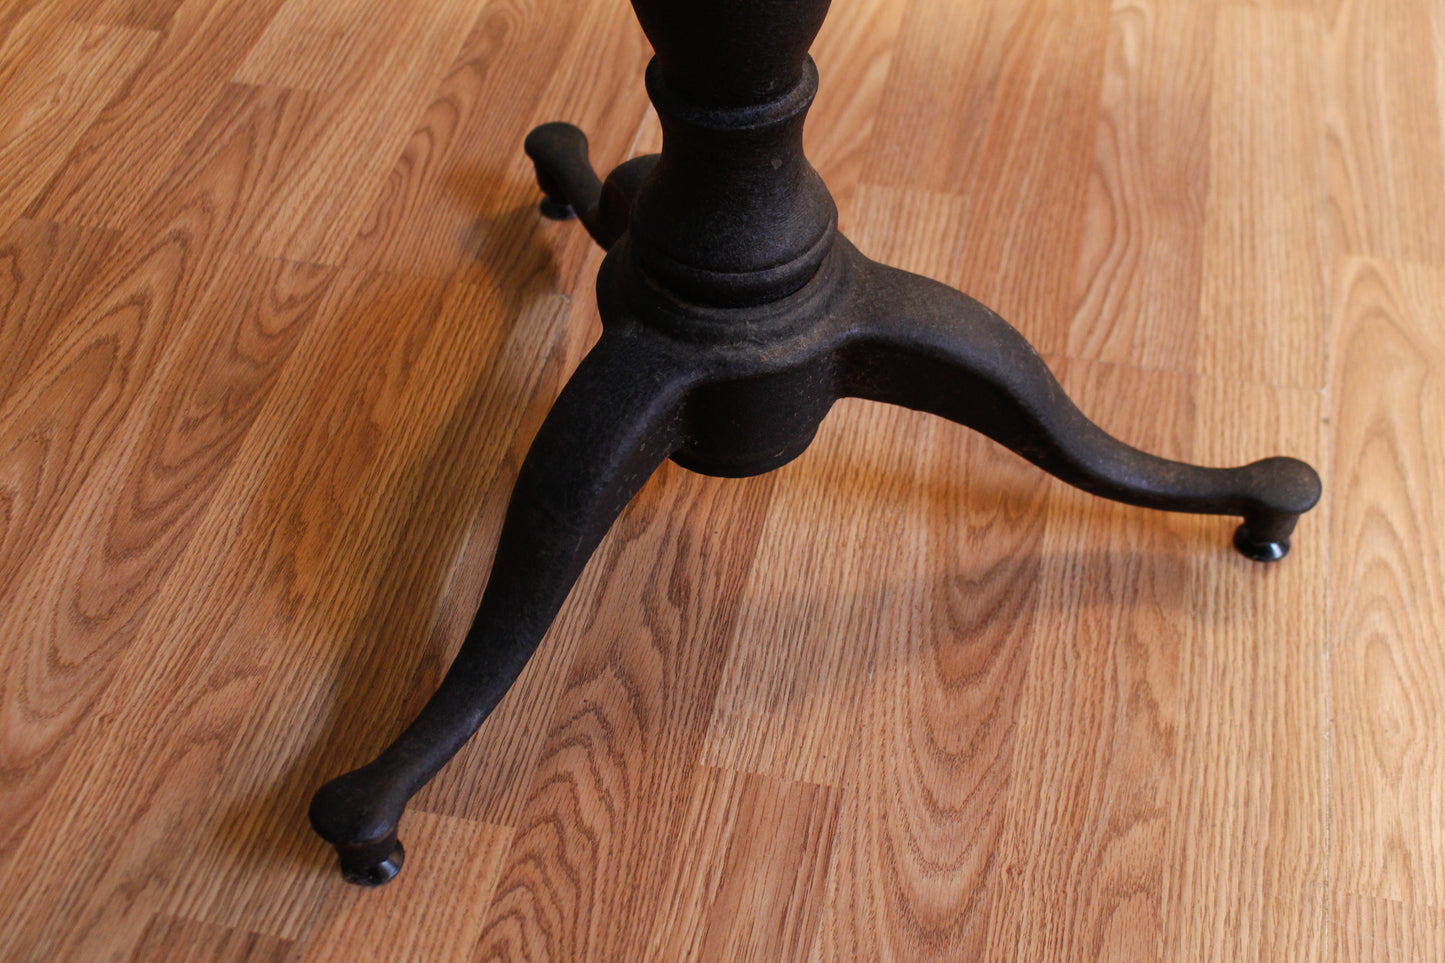 Small Iron & Pine Bistro Table - ONLINE ONLY